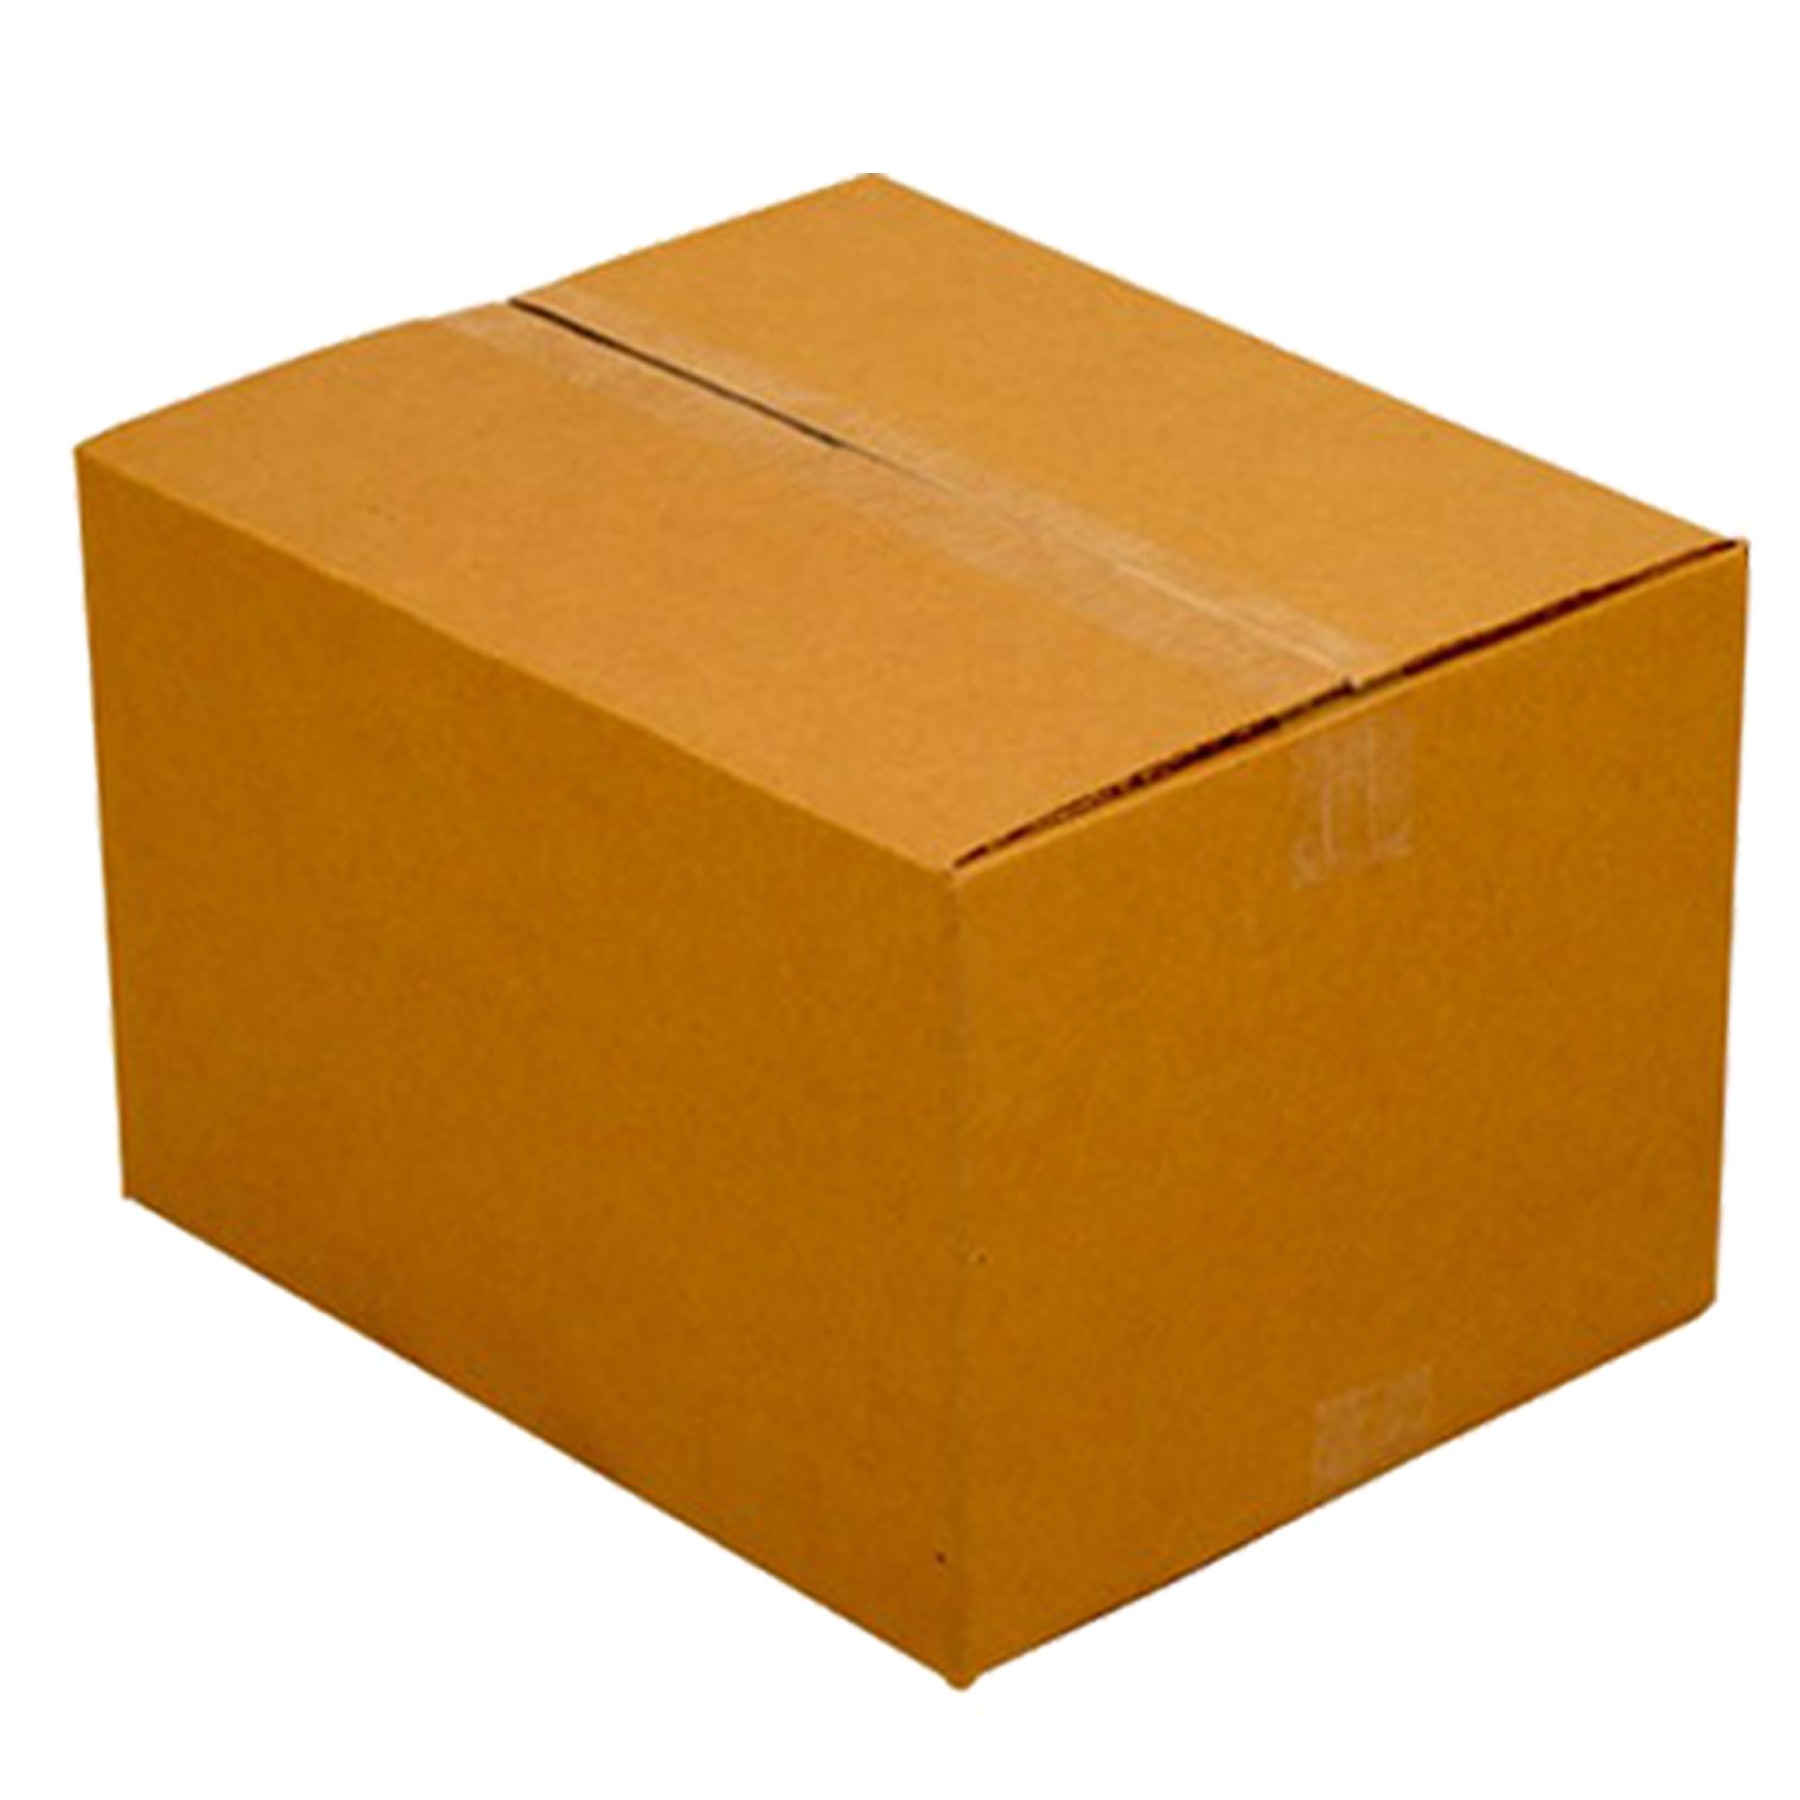 Bundle of 20 Boxes UBoxes Medium Moving Boxes 18 x14 x 12 Inches 